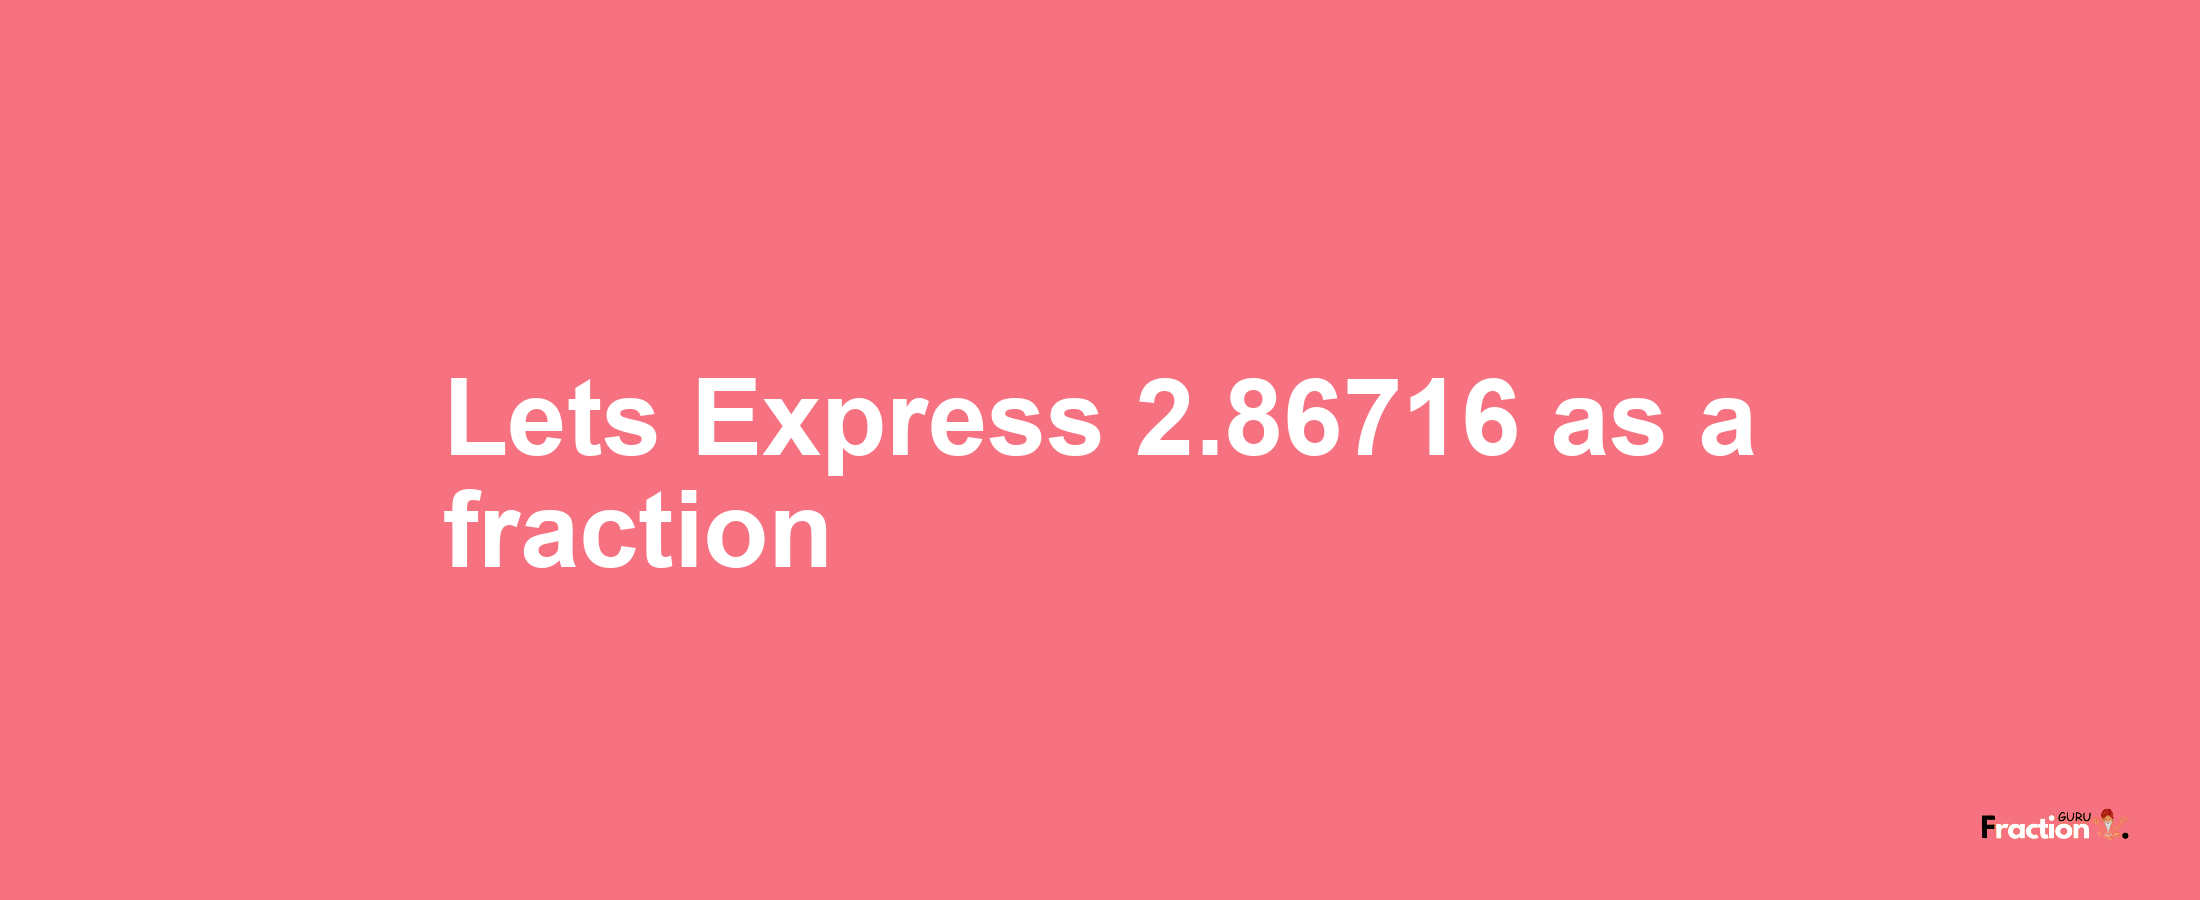 Lets Express 2.86716 as afraction